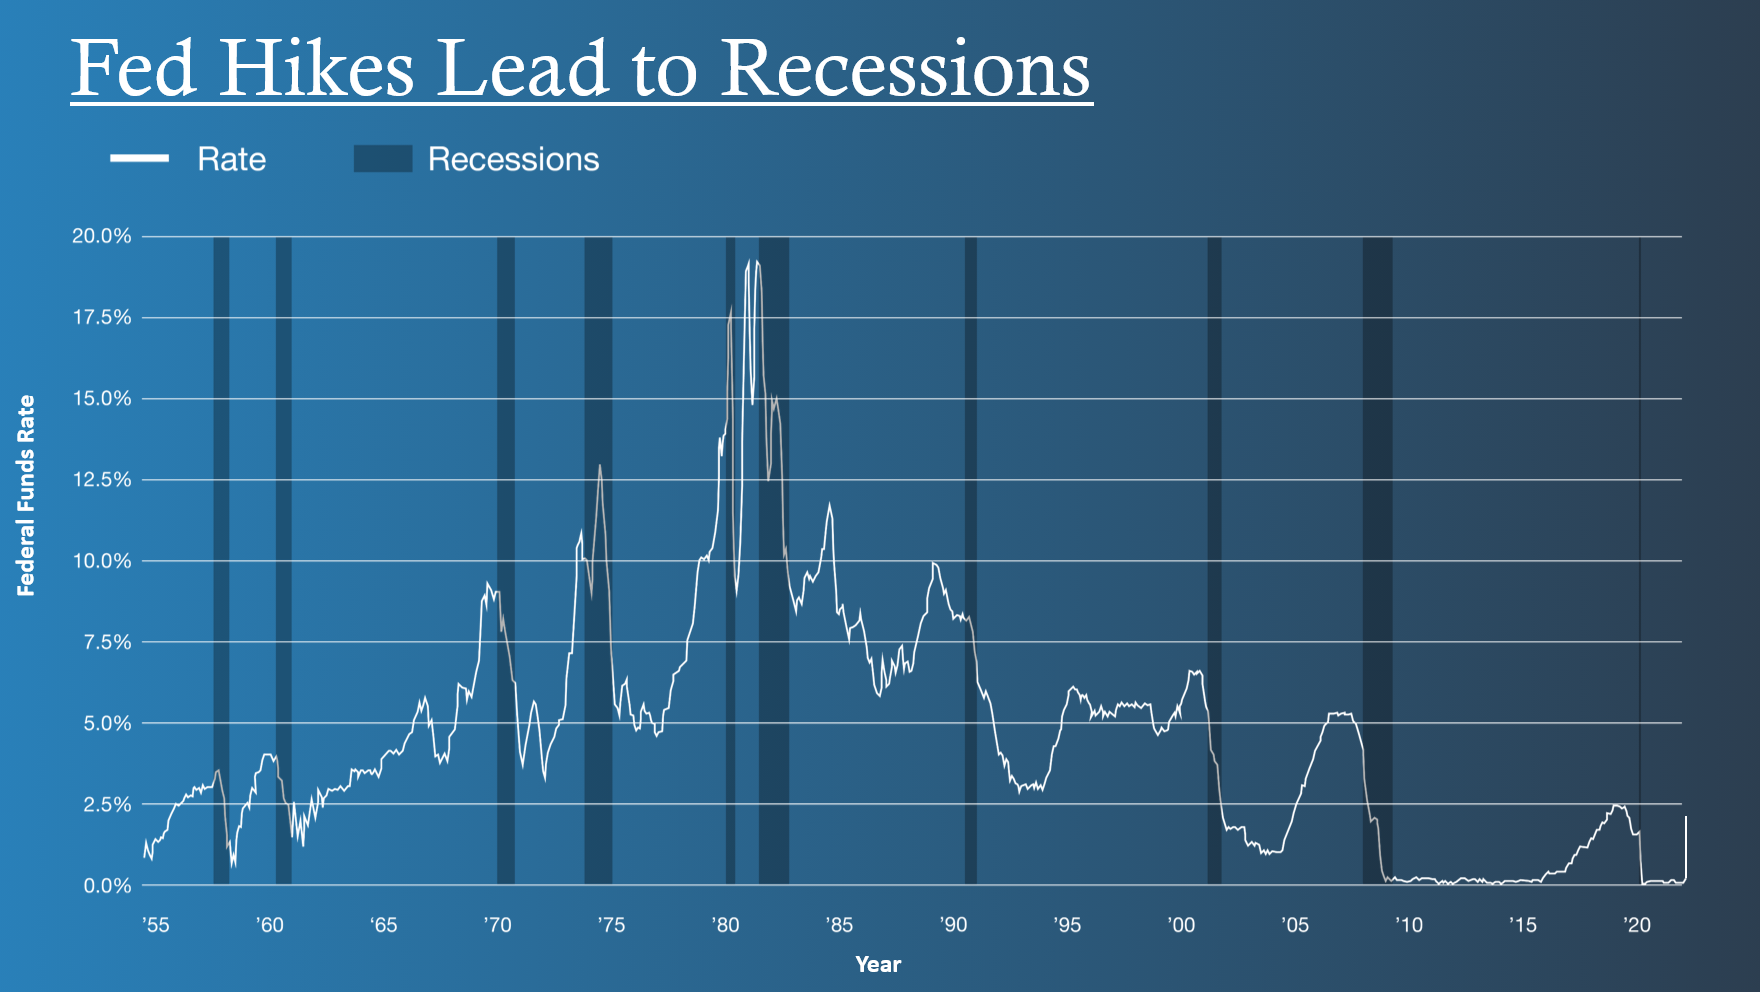 Fed Hikes Lead to Recessions